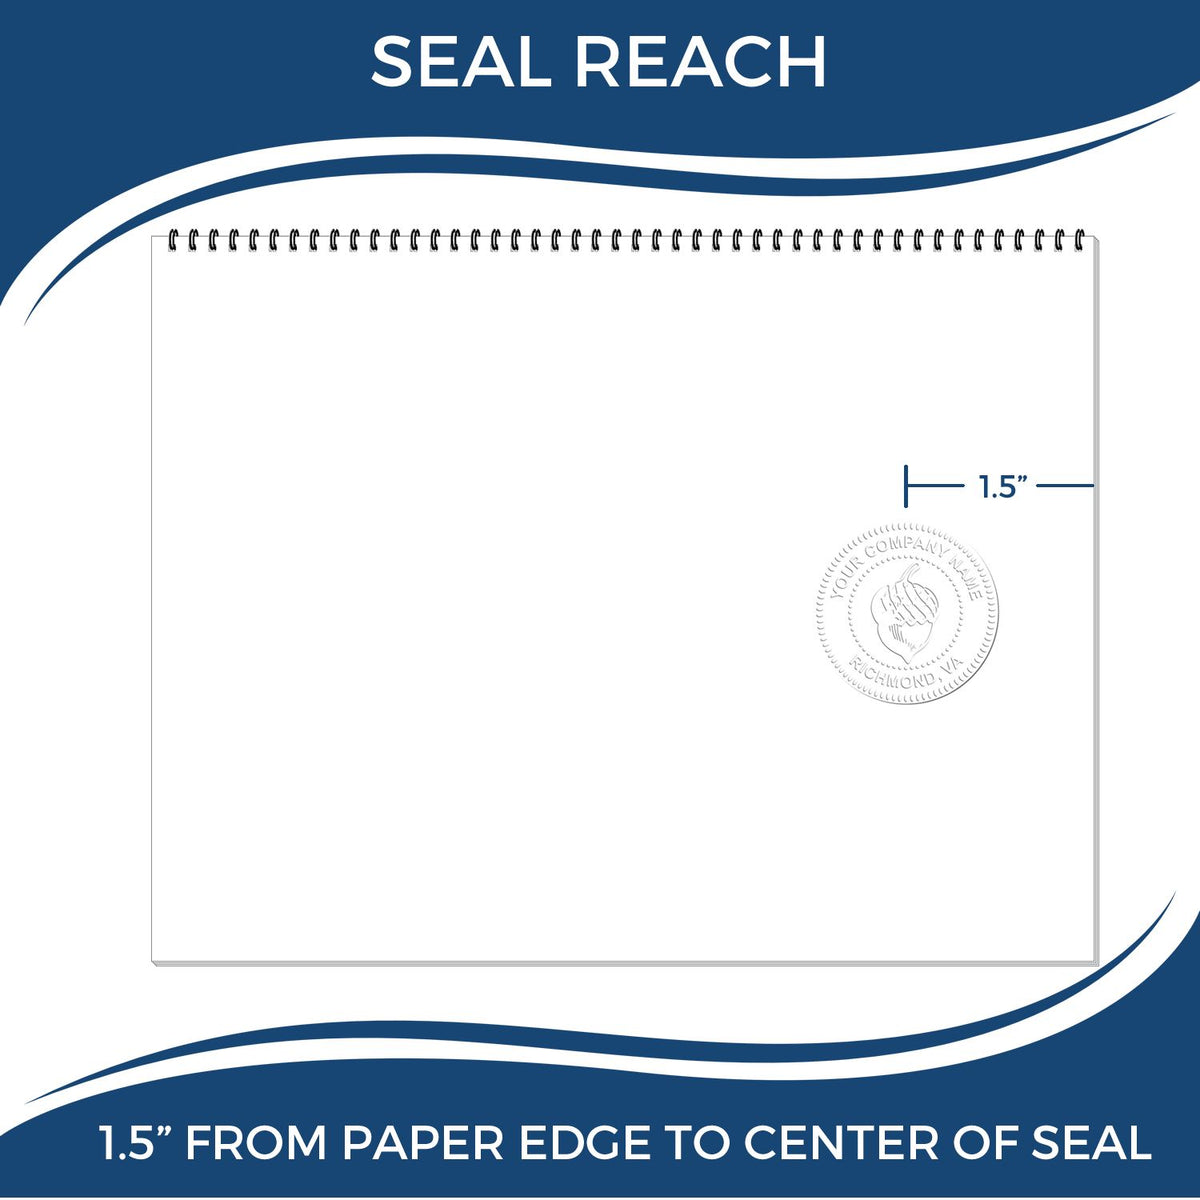 An infographic showing the seal reach which is represented by a ruler and a miniature seal image of the Soft Washington Professional Engineer Seal